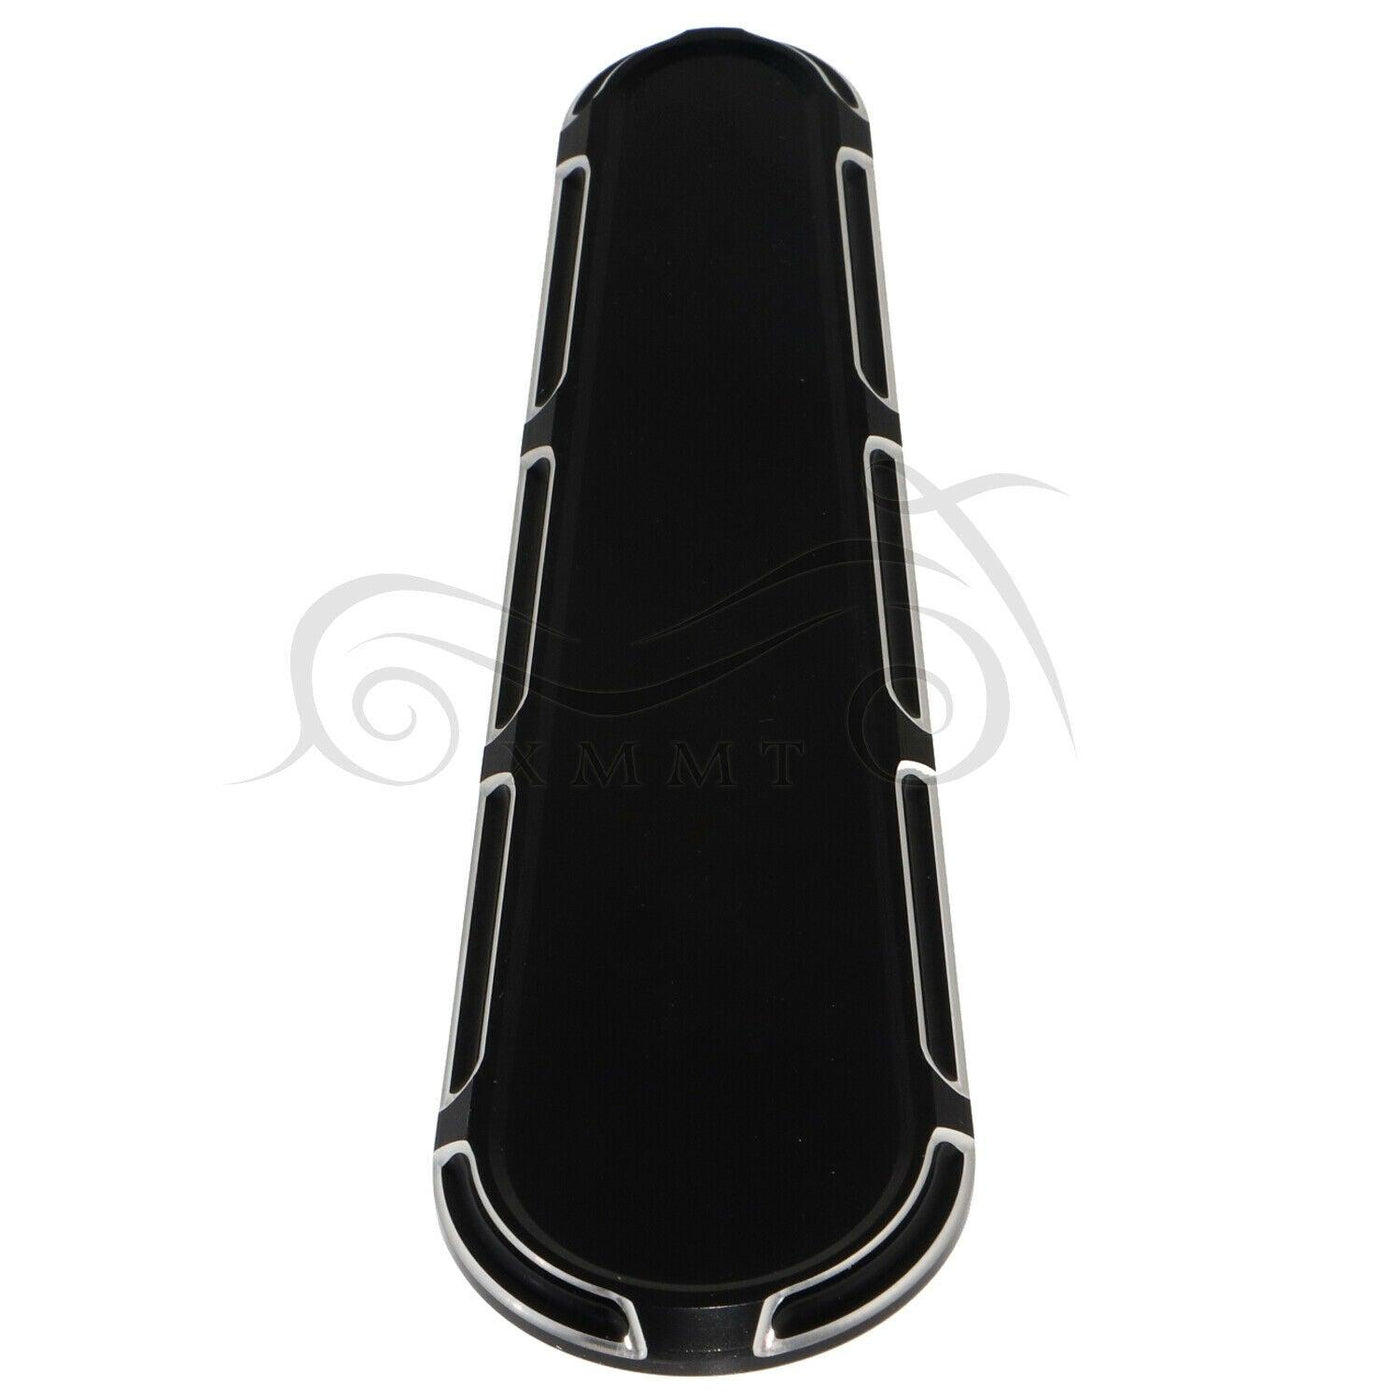 Black Cut Custom Front Dash Insert Cover For Harley Electra Glide Ultra Classic - Moto Life Products